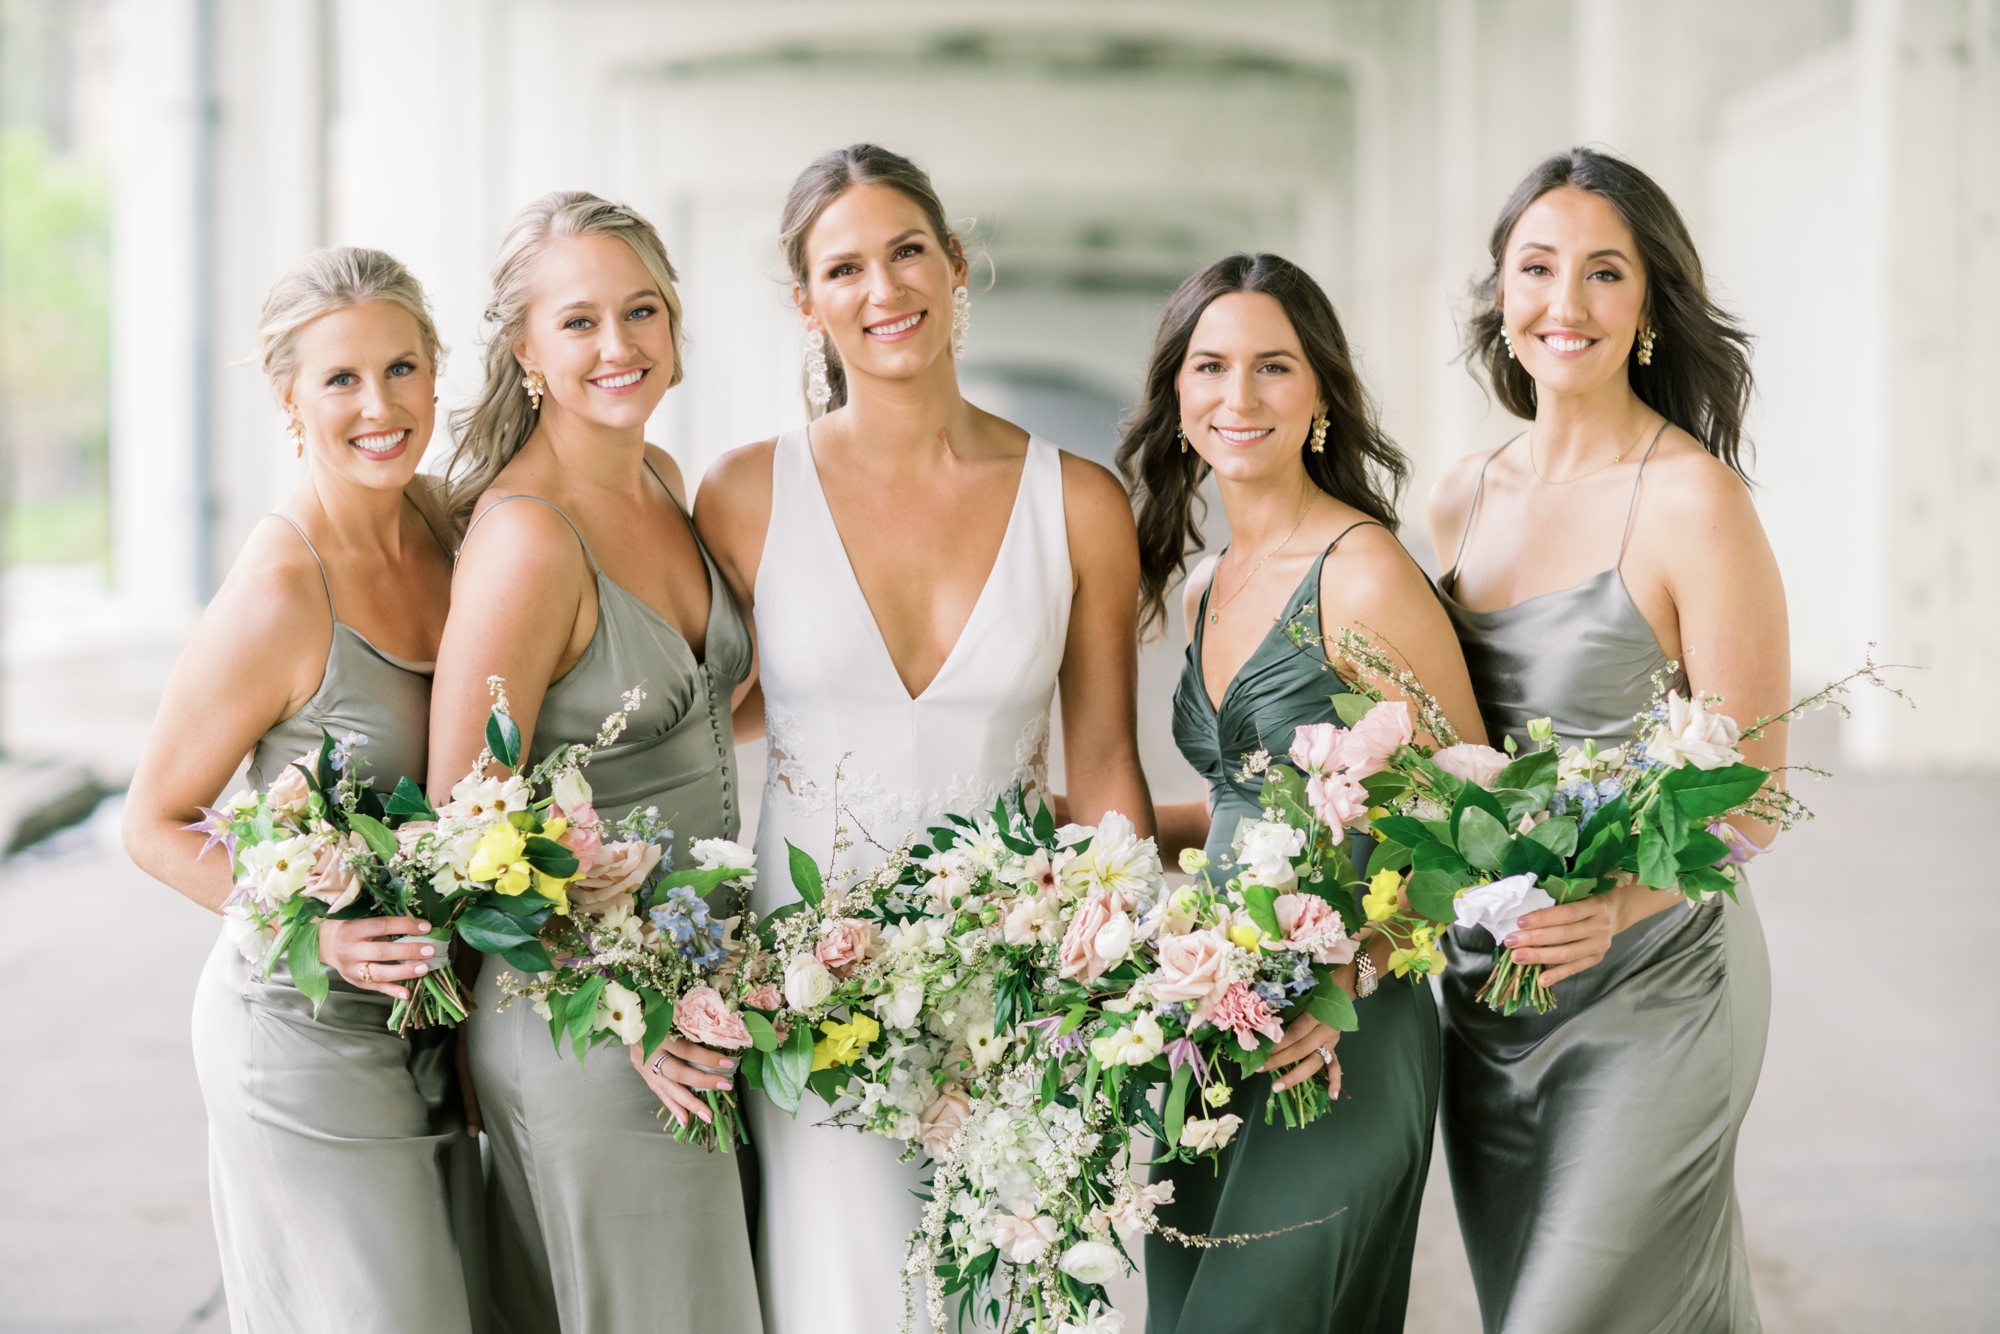 A bride poses with her four bridesmaids that are all wearing green satin bridesmaids' dresses